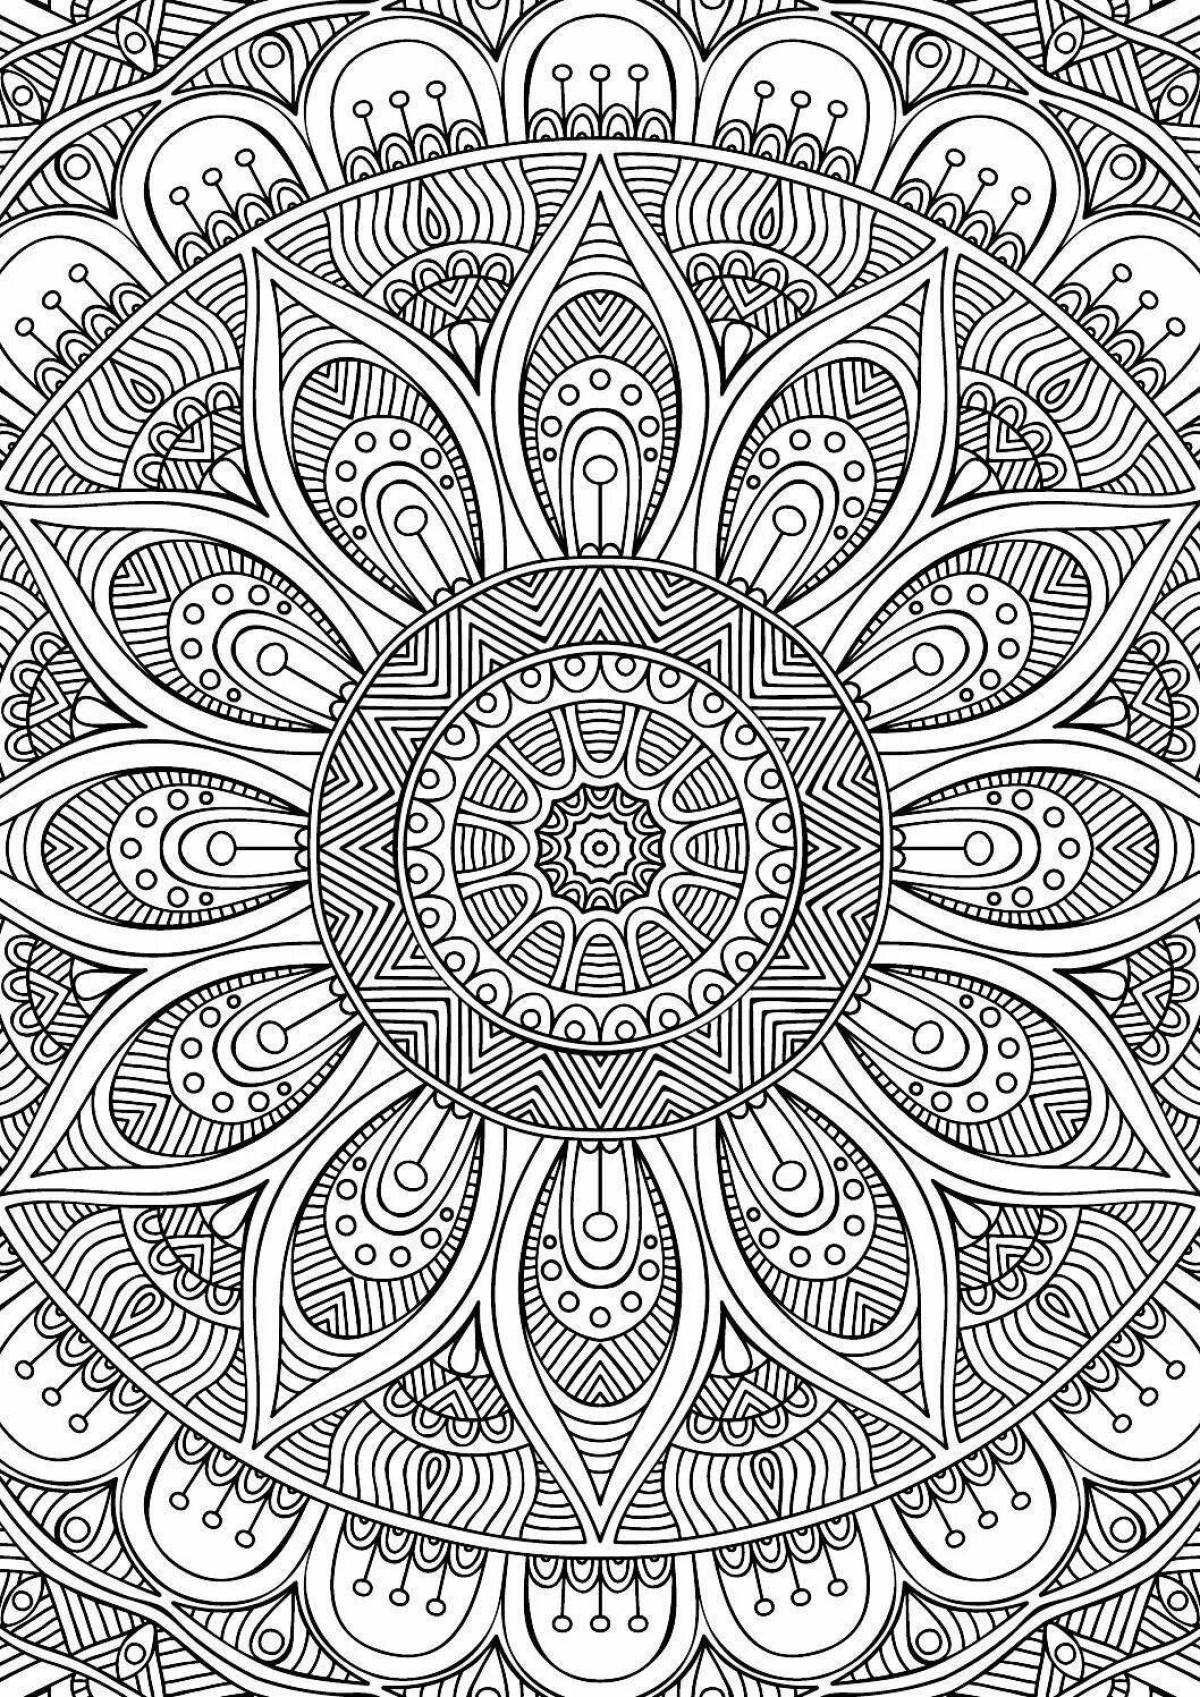 Free coloring for peace of mind